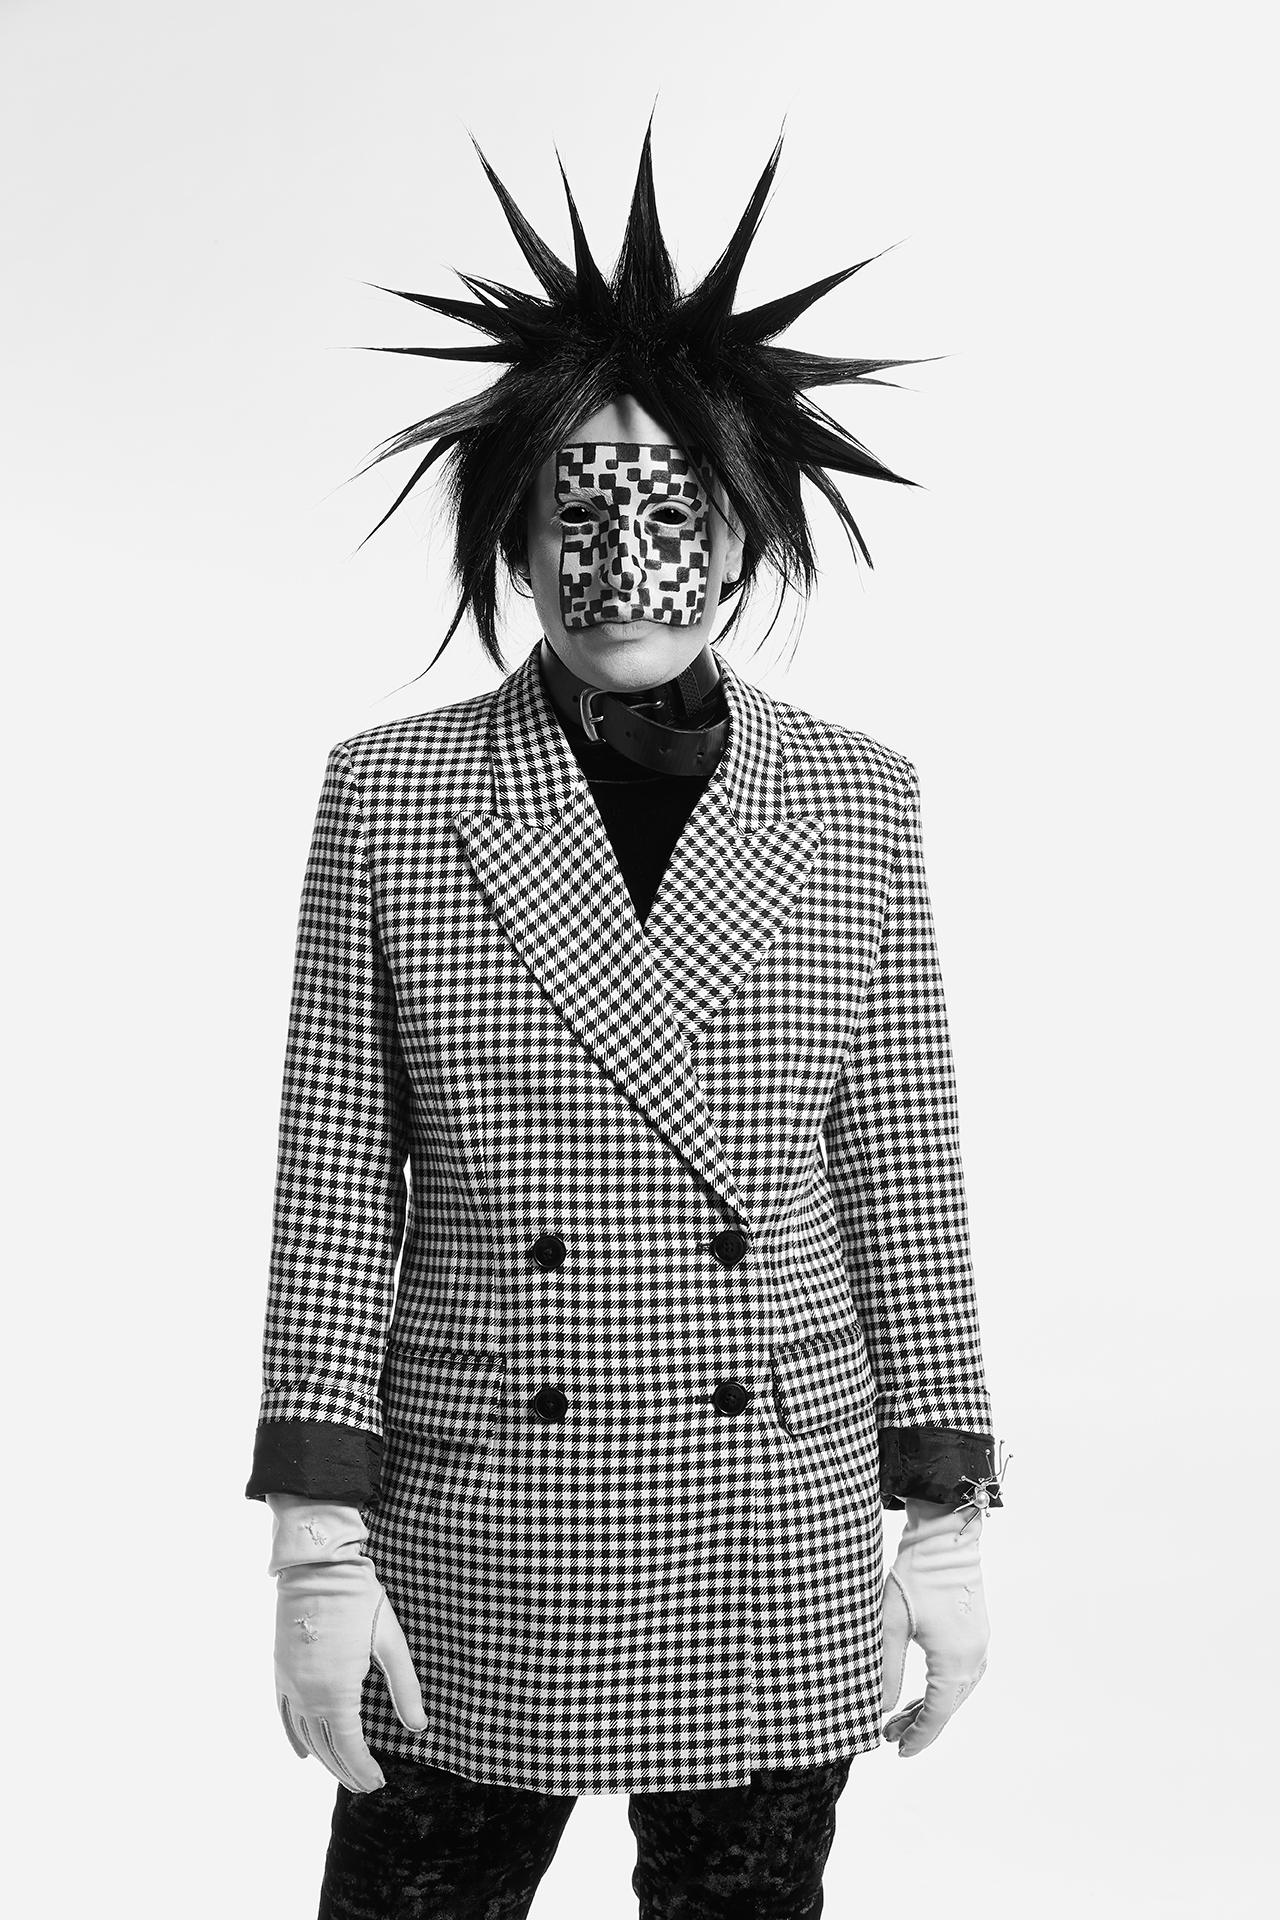 Jesse facing the camera with checkered facepaint, spiked black hair and a checkered blazer on a white background